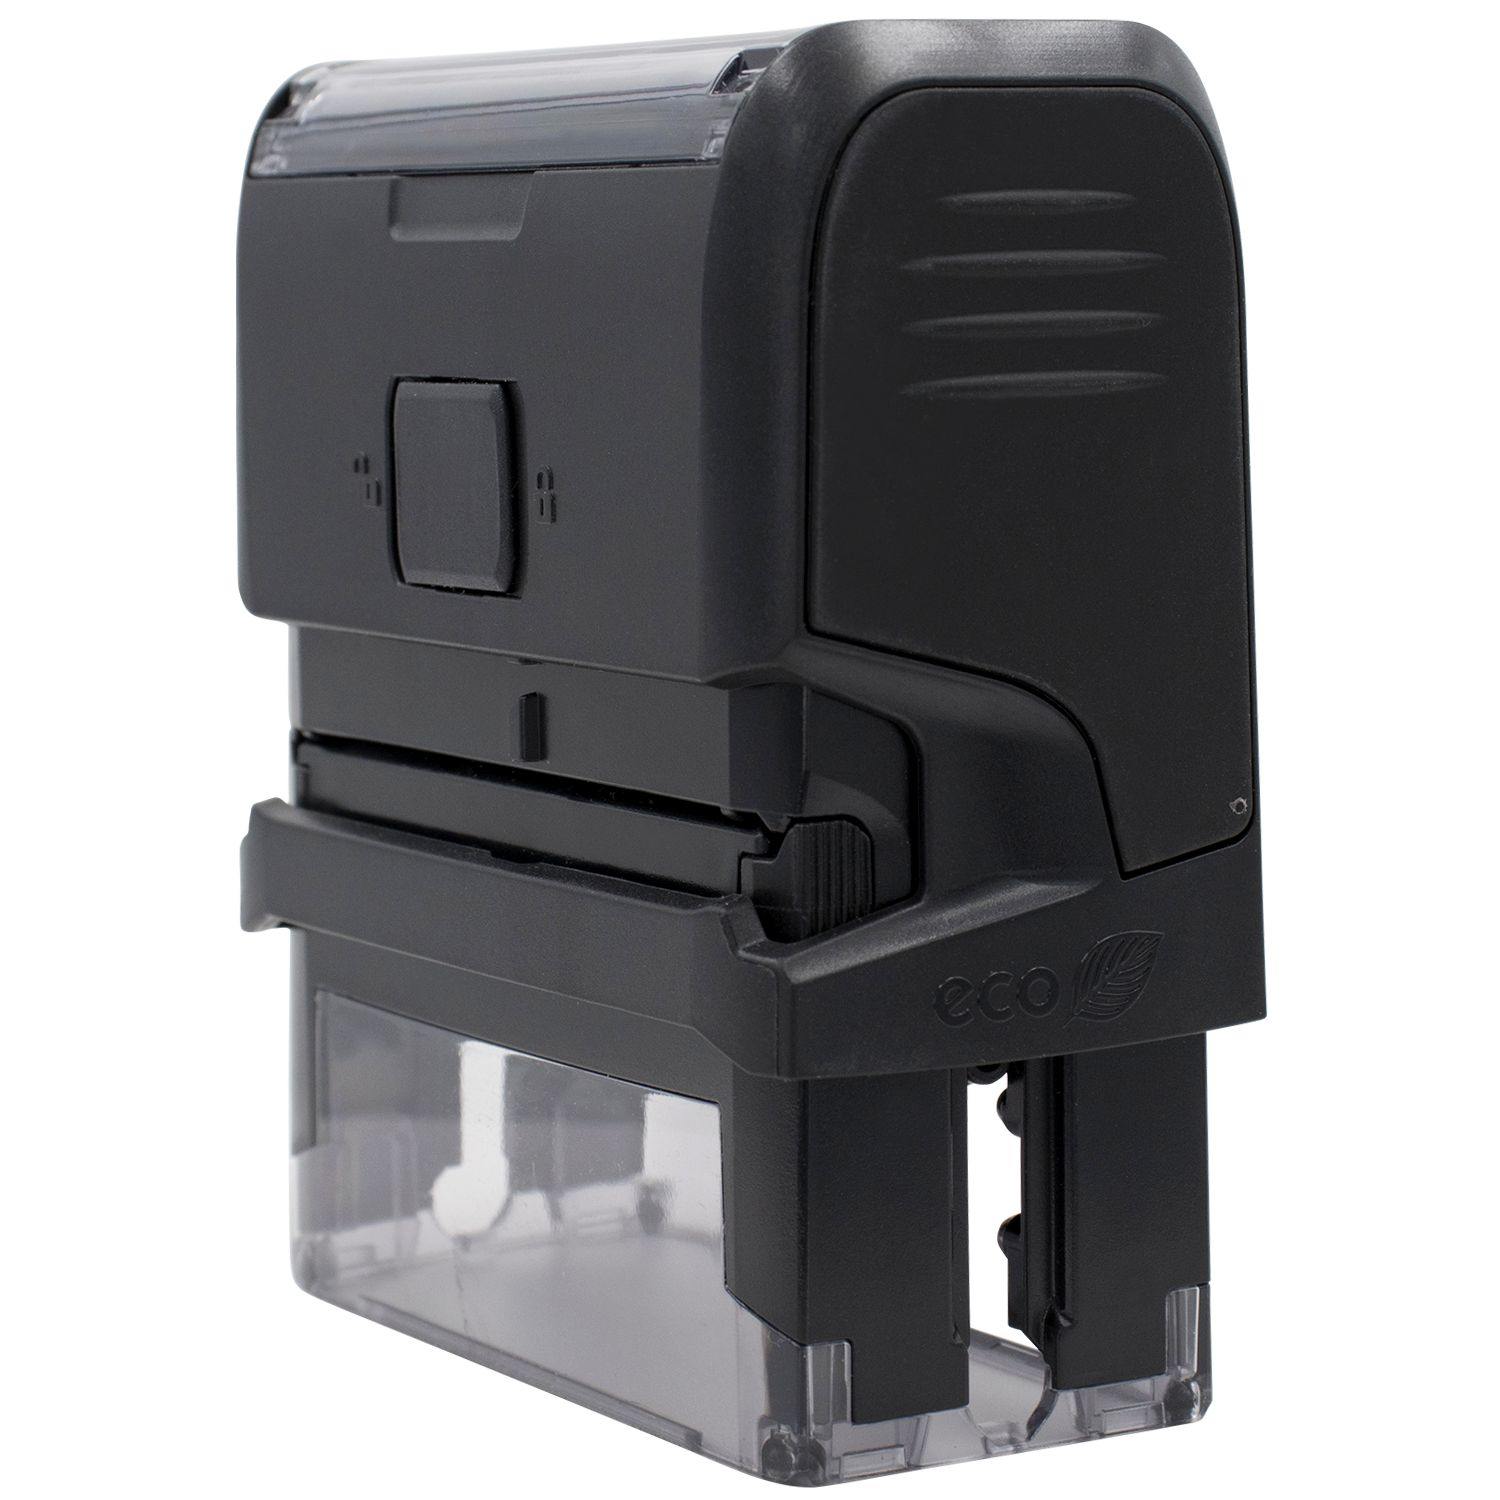 Self-Inking Despachado Stamp - Engineer Seal Stamps - Brand_Trodat, Impression Size_Small, Stamp Type_Self-Inking Stamp, Type of Use_Office, Type of Use_Shipping & Receiving